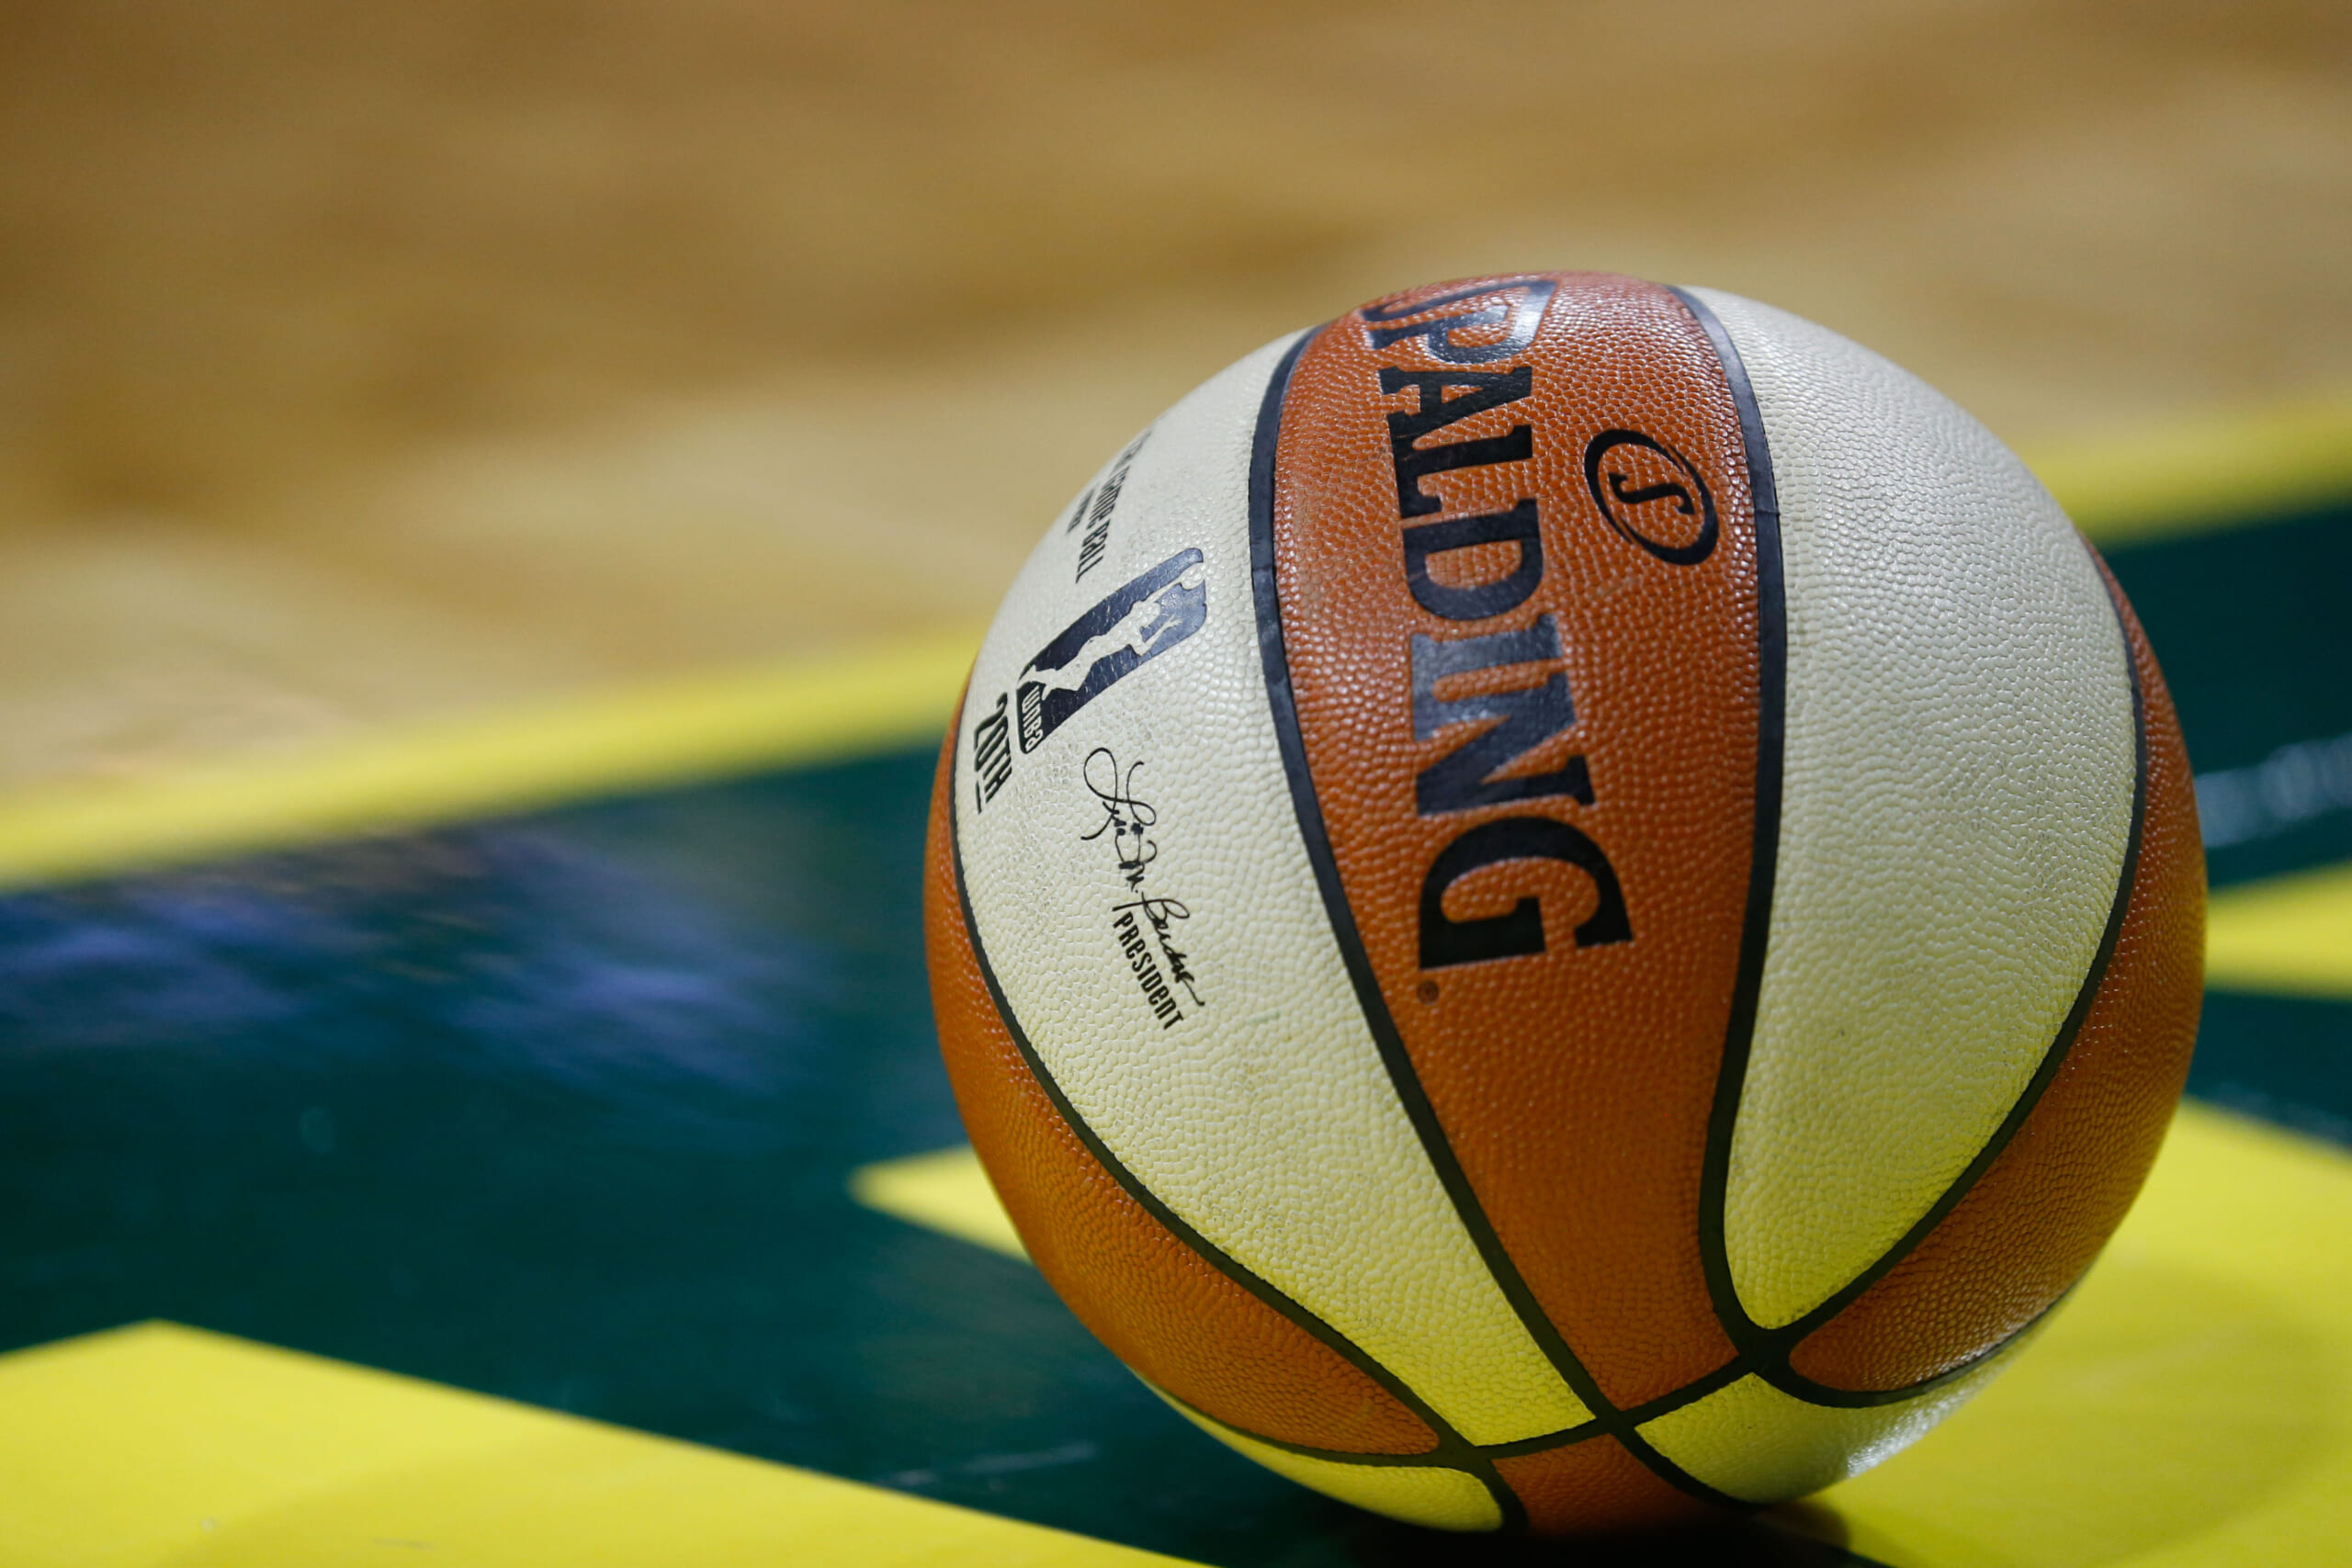 Indiana Fever Schedule 2022 Wnba Announces 36-Game Schedule For The 2022 Season